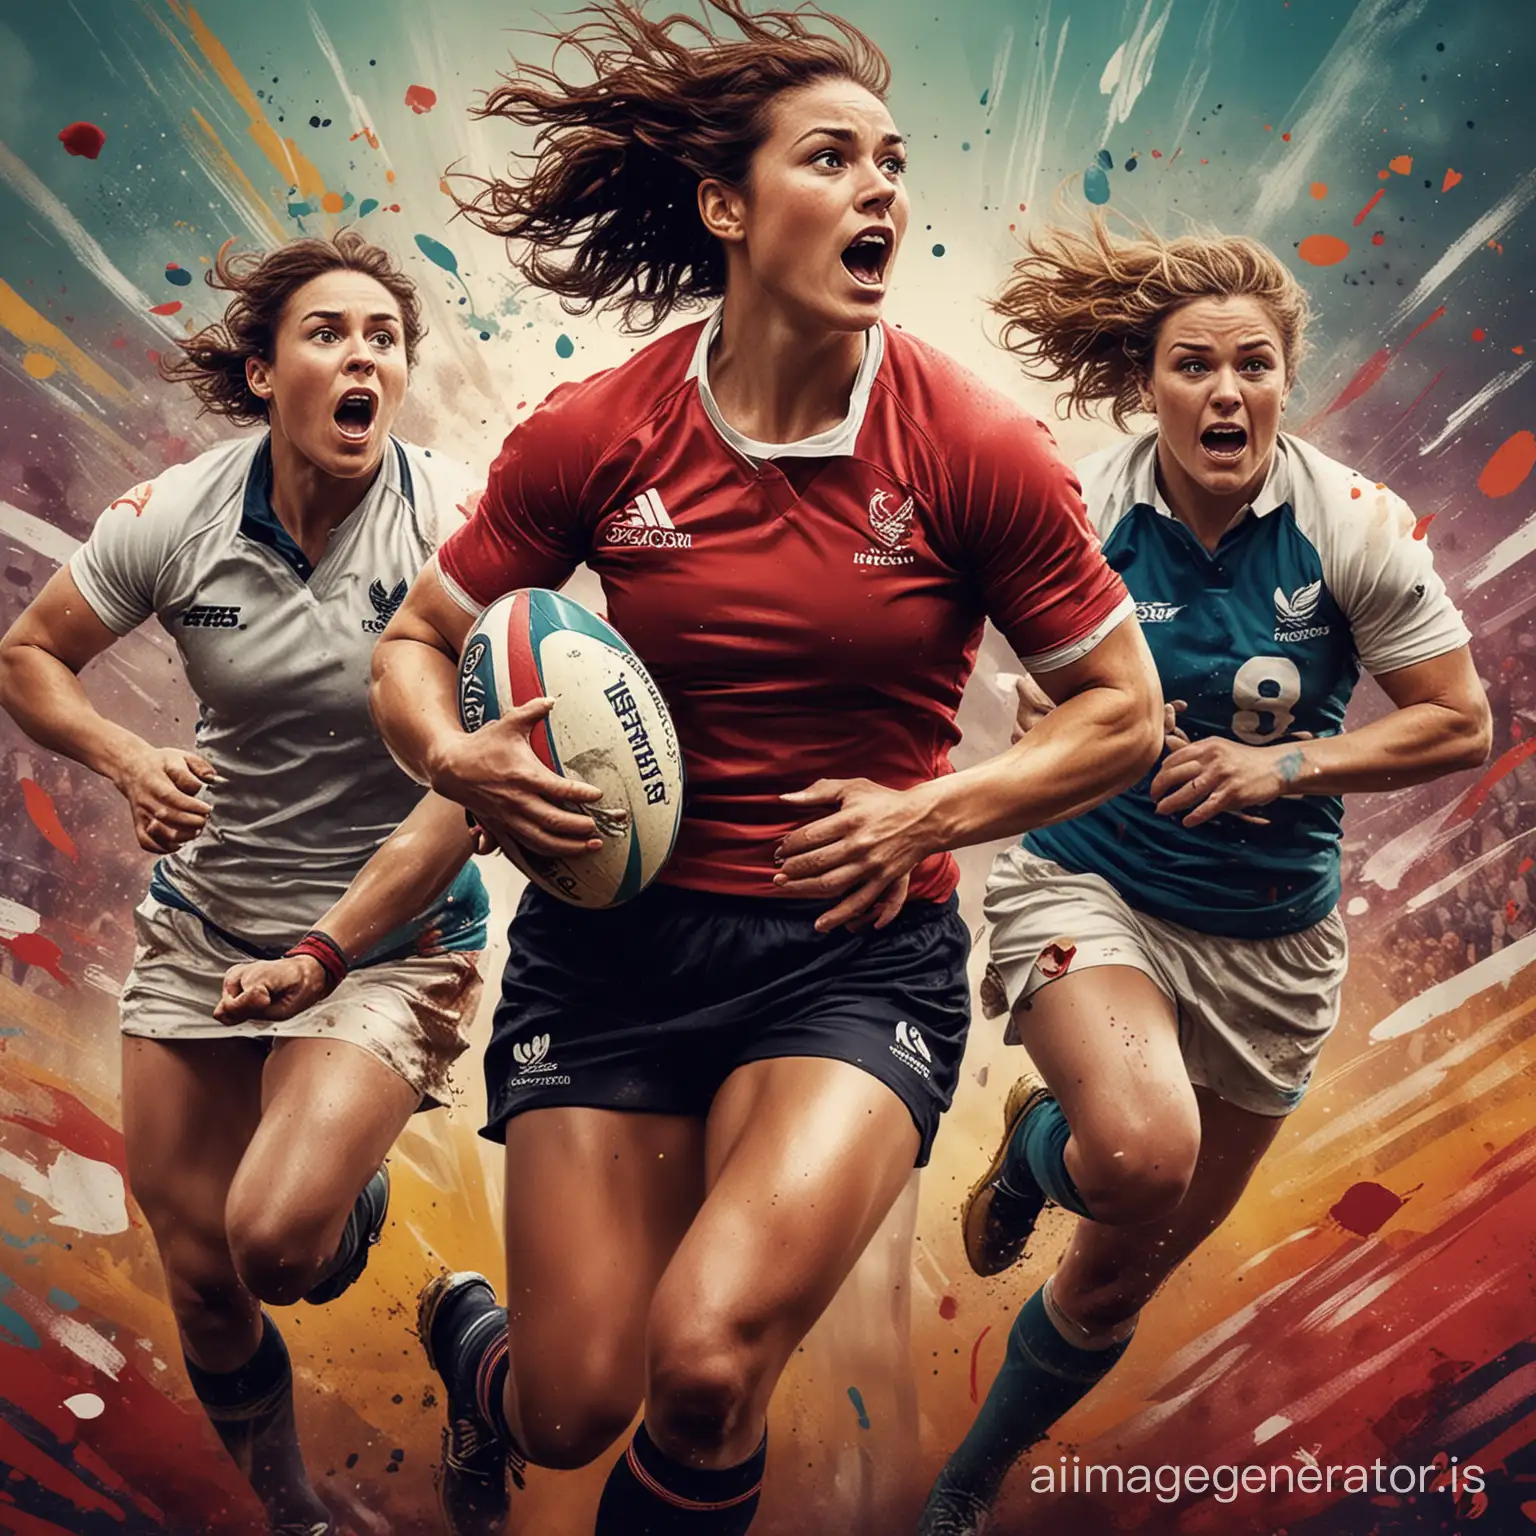 A striking movie poster for "The Art of RUGBY" features a diverse group of RUGBY WOMEN icons, each holding a unique work of art that symbolizes their respective movements and struggles. The background is an energetic and bold color palette, with a mix of abstract and realistic art styles. The overall atmosphere of the poster is inspiring and empowering, as it celebrates the power of art and creativity in the face of adversity.